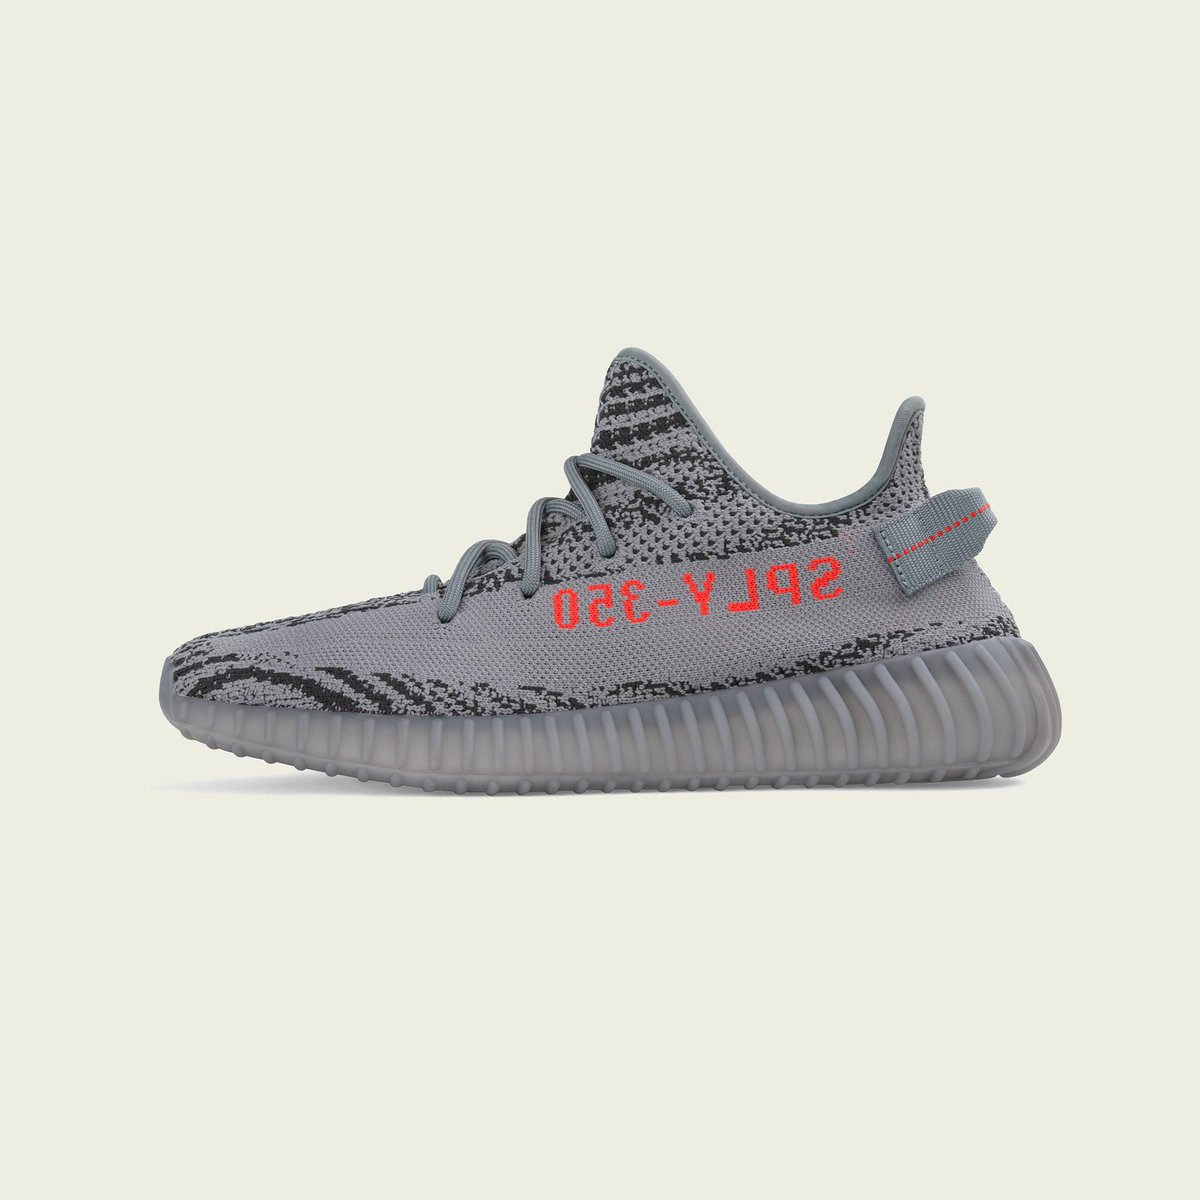 The raffle for the adidas Yeezy 350 V2 